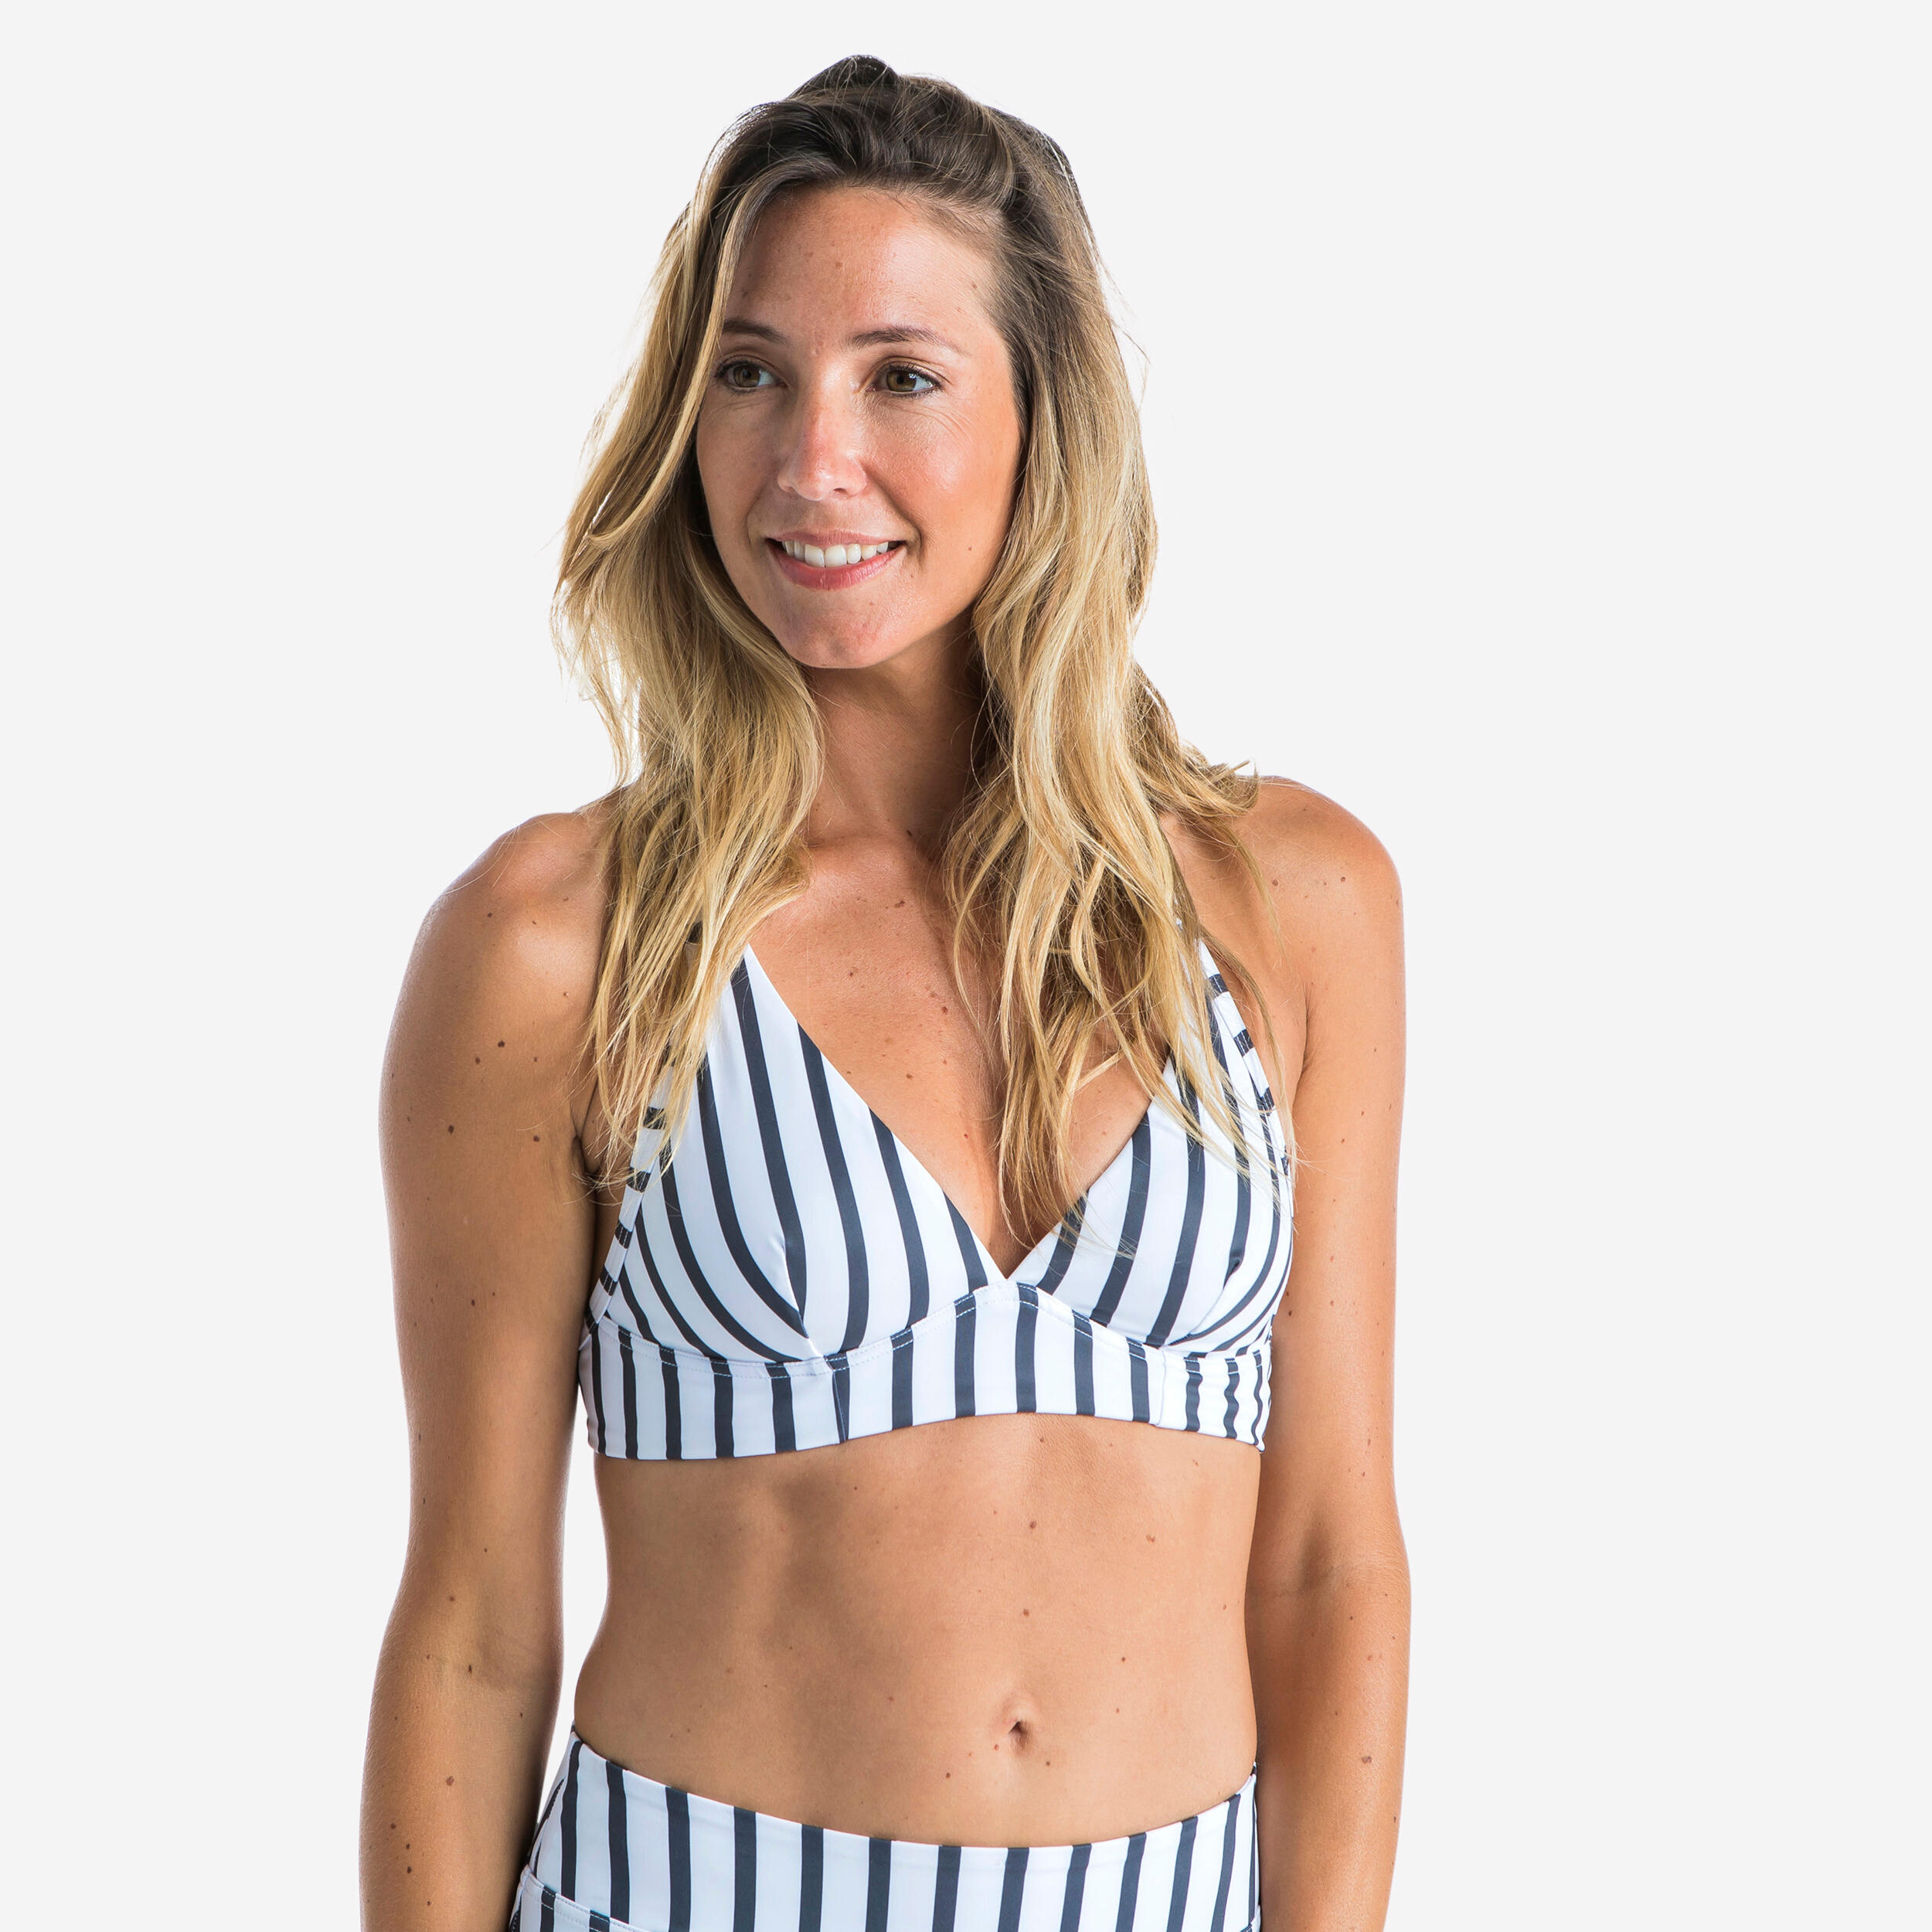 OLAIAN Women's Surfing Swimsuit Crop Top with Adjustable Back BEA MARIN - WHITE GREY